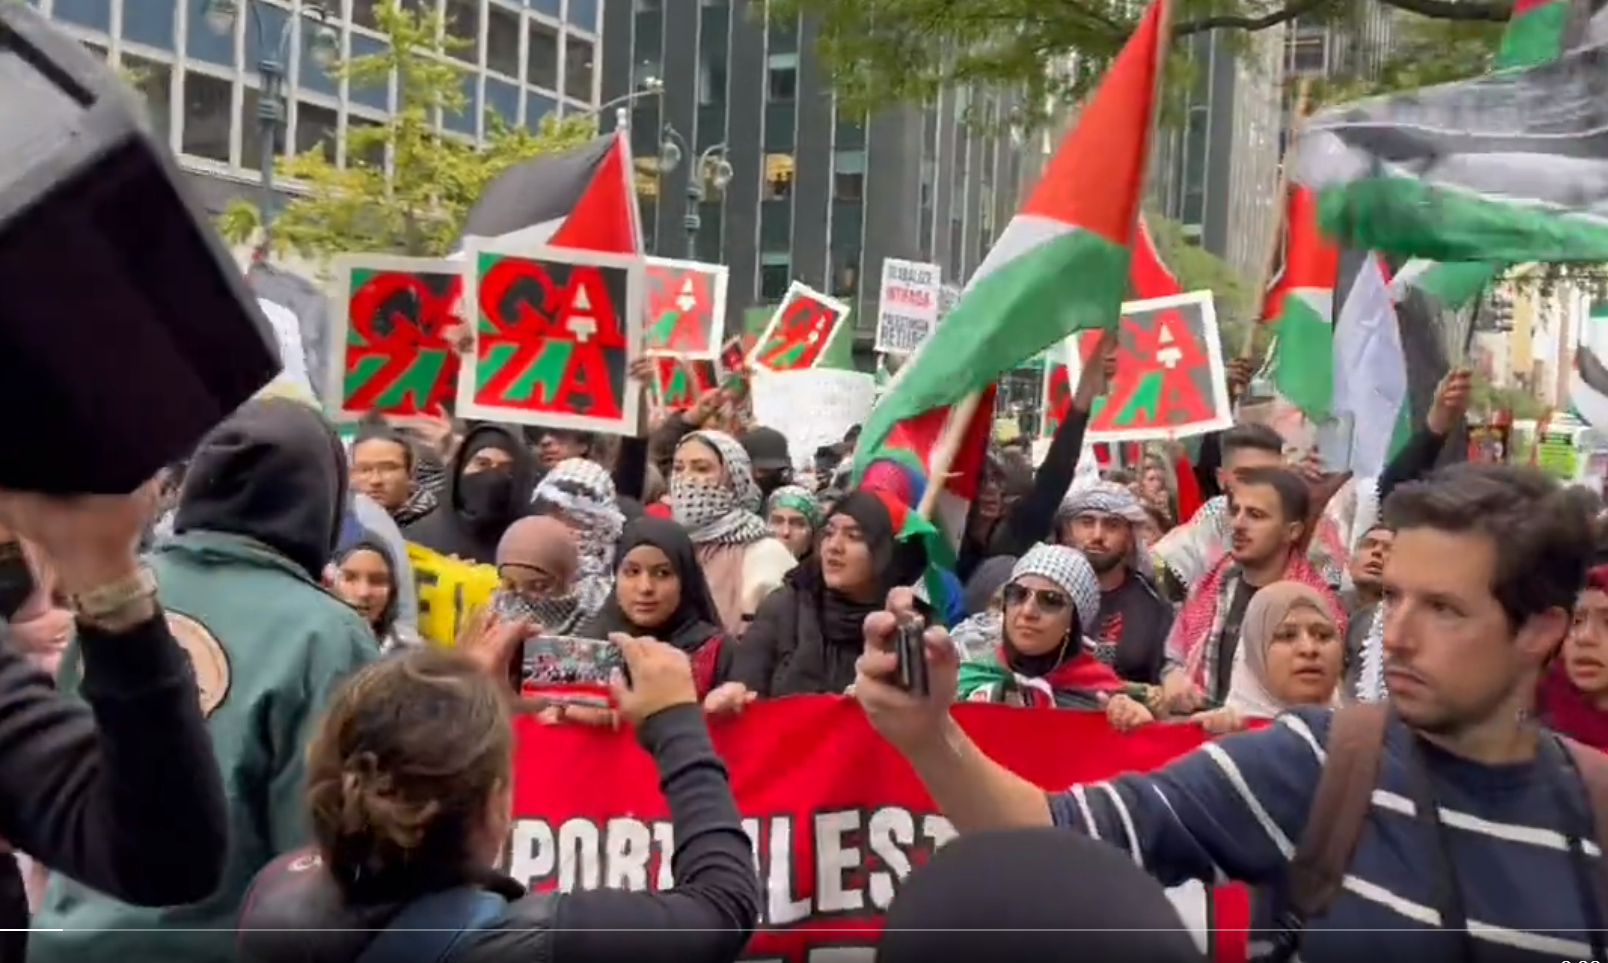 Democrat Renounces Membership in Democratic Socialists of America After ‘Hate-Filled’ Rally Celebrating Hamas